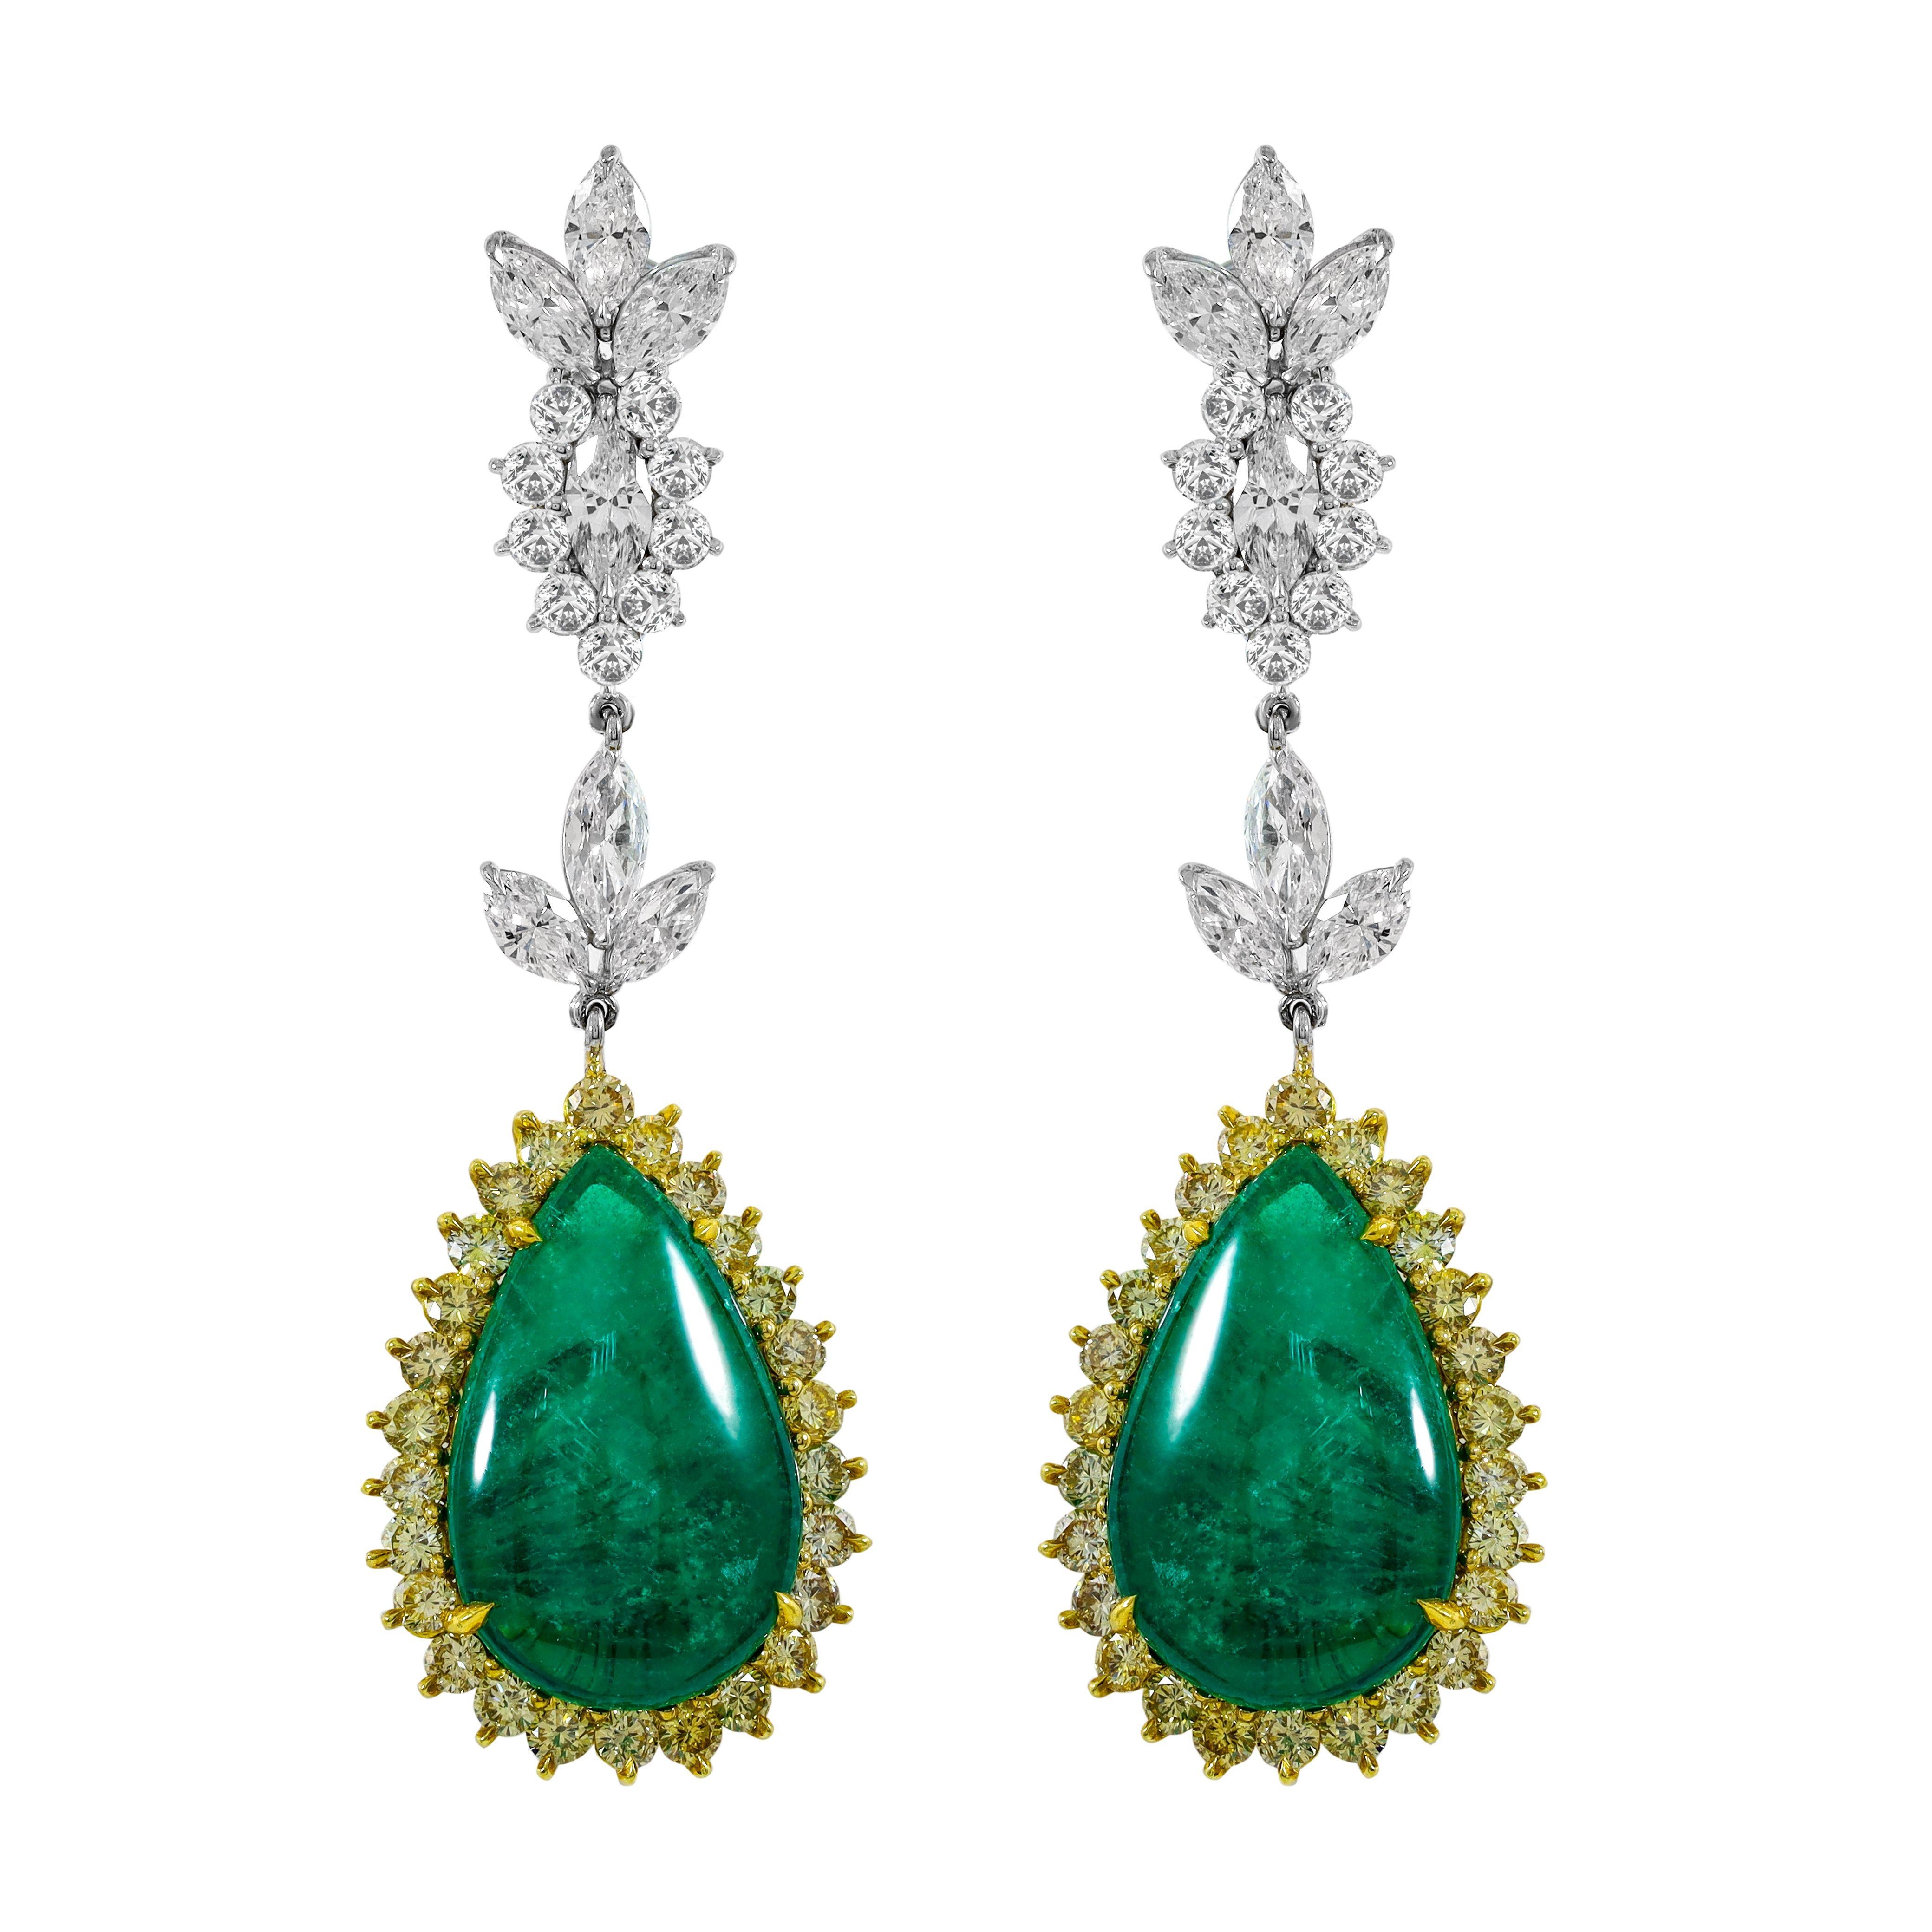 18kt white and yellow gold, features 14.05 carats of  GIA#2151989321 certified two pear cabochons green emeralds with 7.60 carats of diamonds marquise & round.